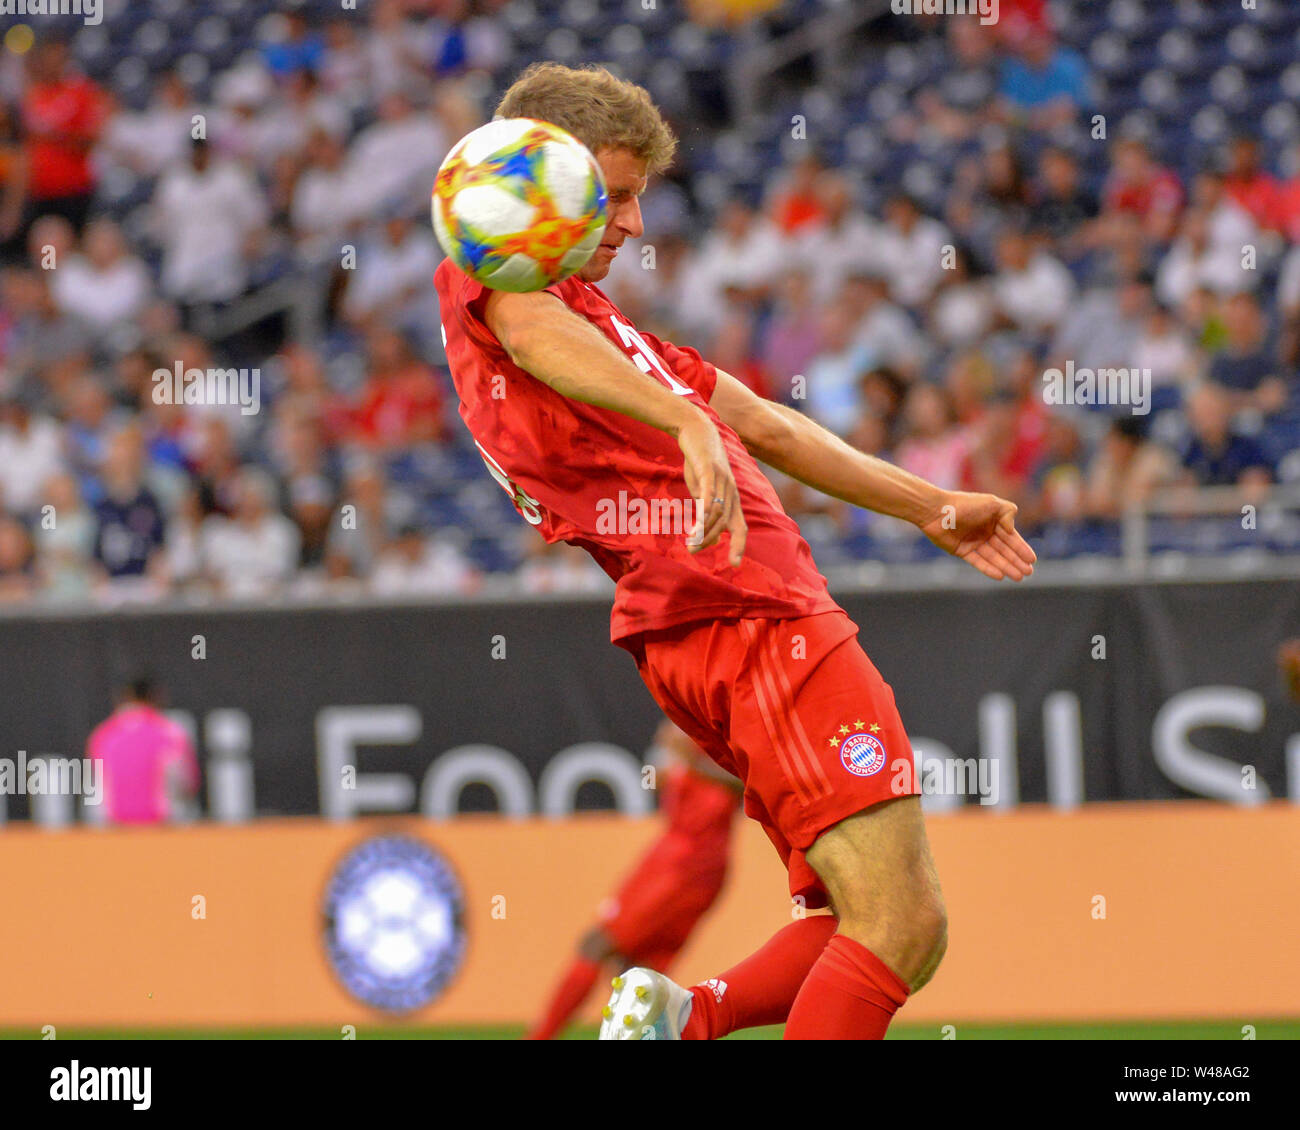 Houston, TX, USA. 20th July, 2019. Bayern forward, Thomas Muller (25), goes up to head the ball during the 2019 International Champions Cup match between Real Madrid and FC Bayern, at NRG Stadium in Houston, TX. FC Bayern defeated Real Madrid, 3-1. Mandatory Credit: Kevin Langley/Sports South Media/CSM/Alamy Live News Stock Photo